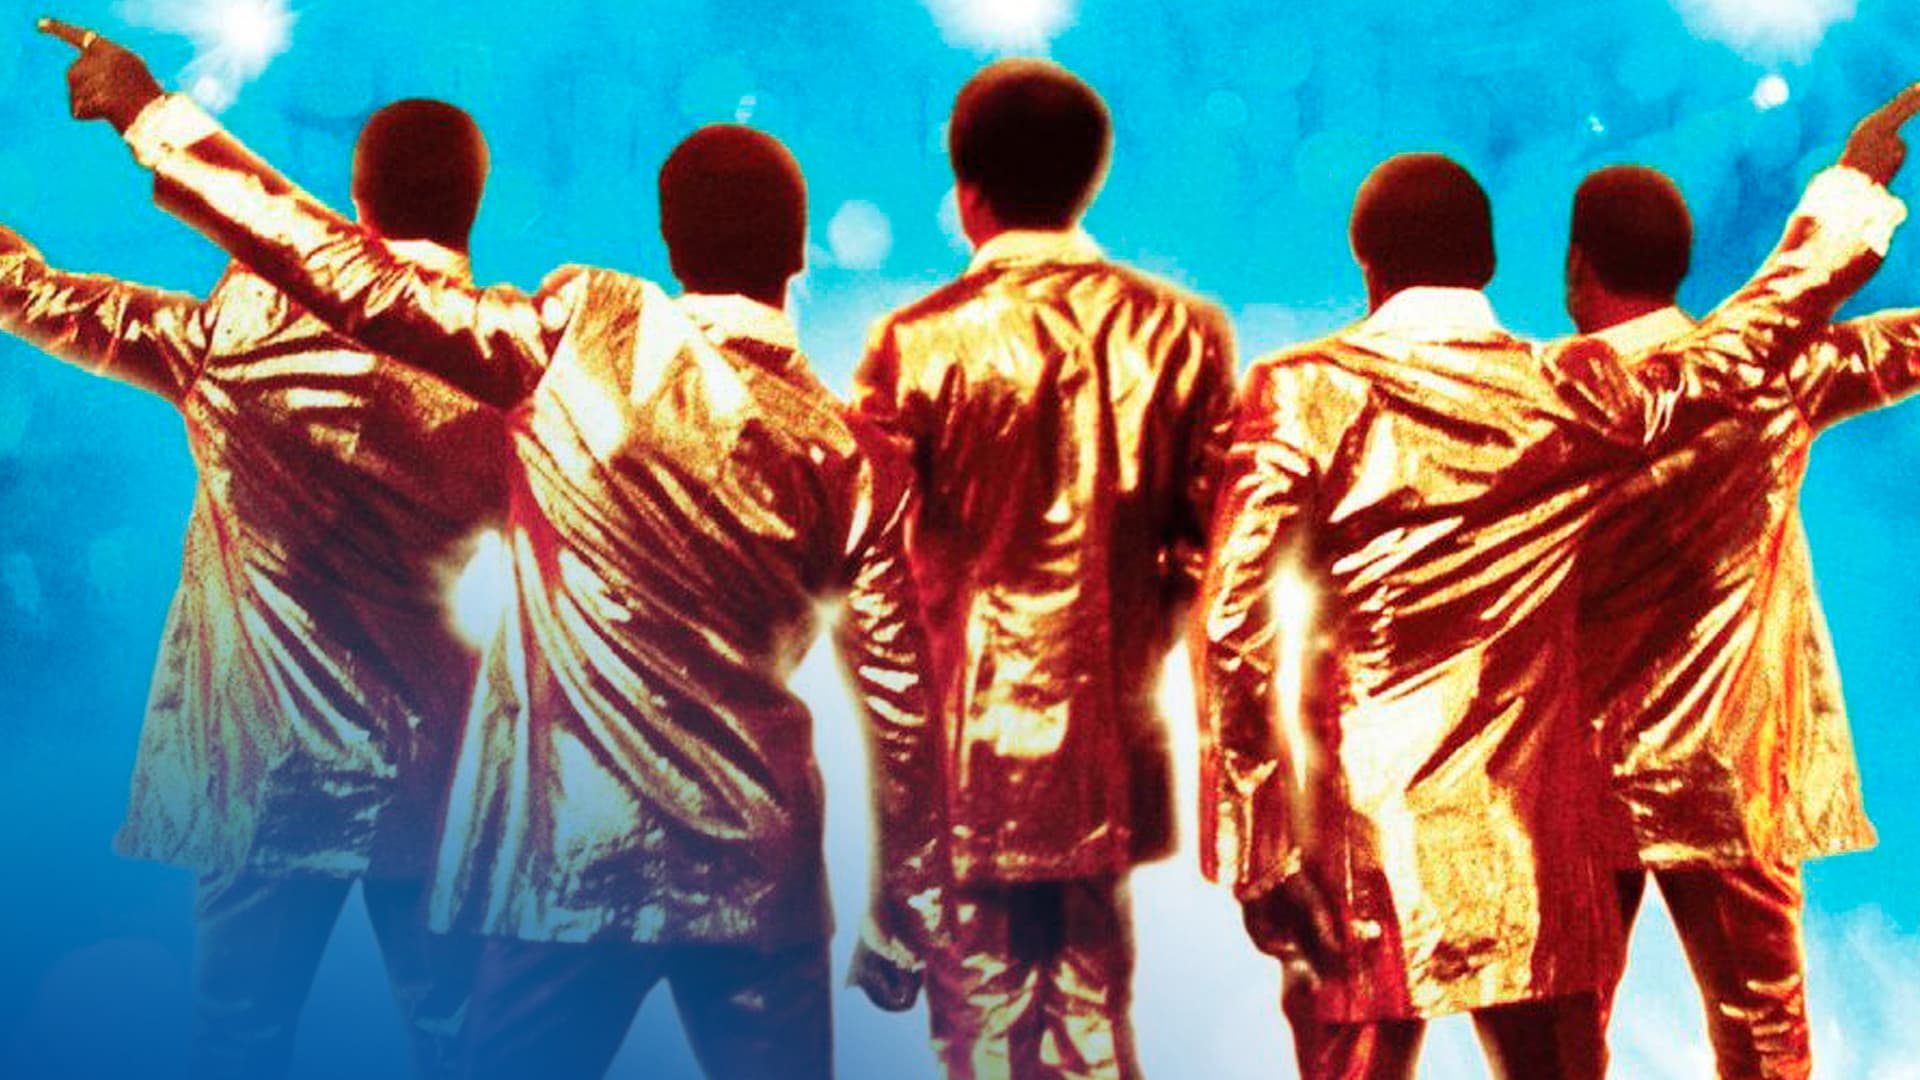 arely flores recommends The Temptations Movie Watch